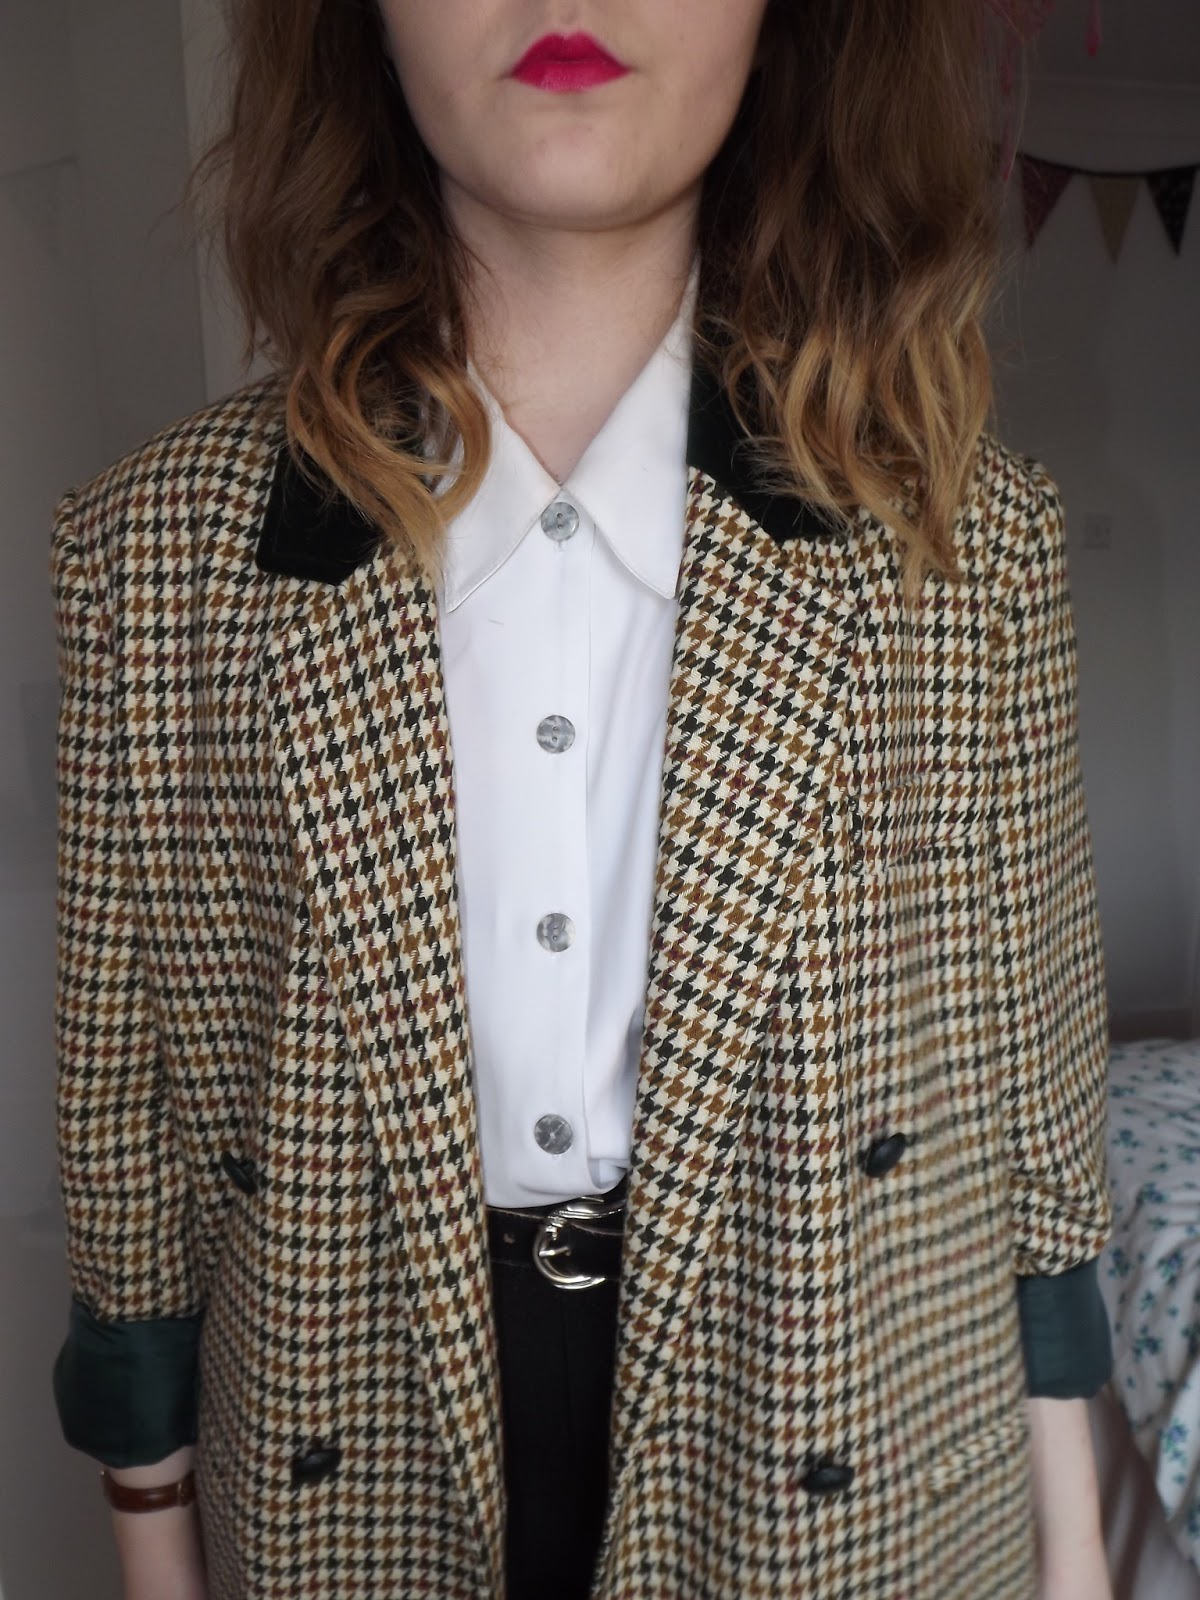 The Lucy Rose Fashion // UK Fashion Blog: Sixth Form and College Outfit ...